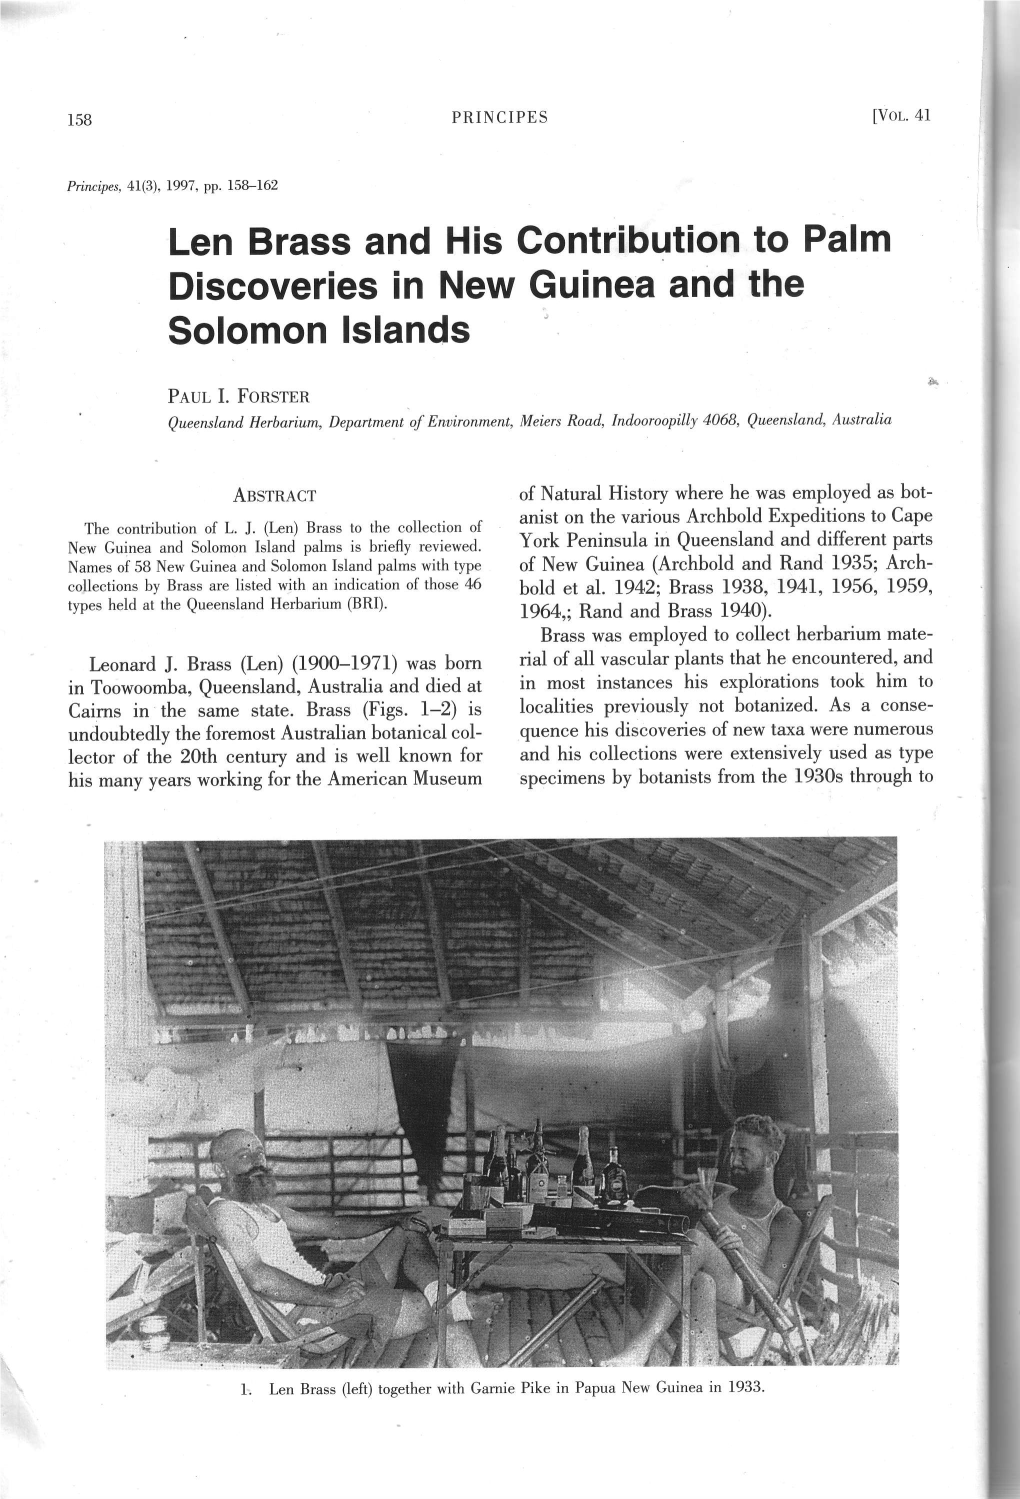 Len Brass and His Contribution to Palm Discoveries in New Guinea